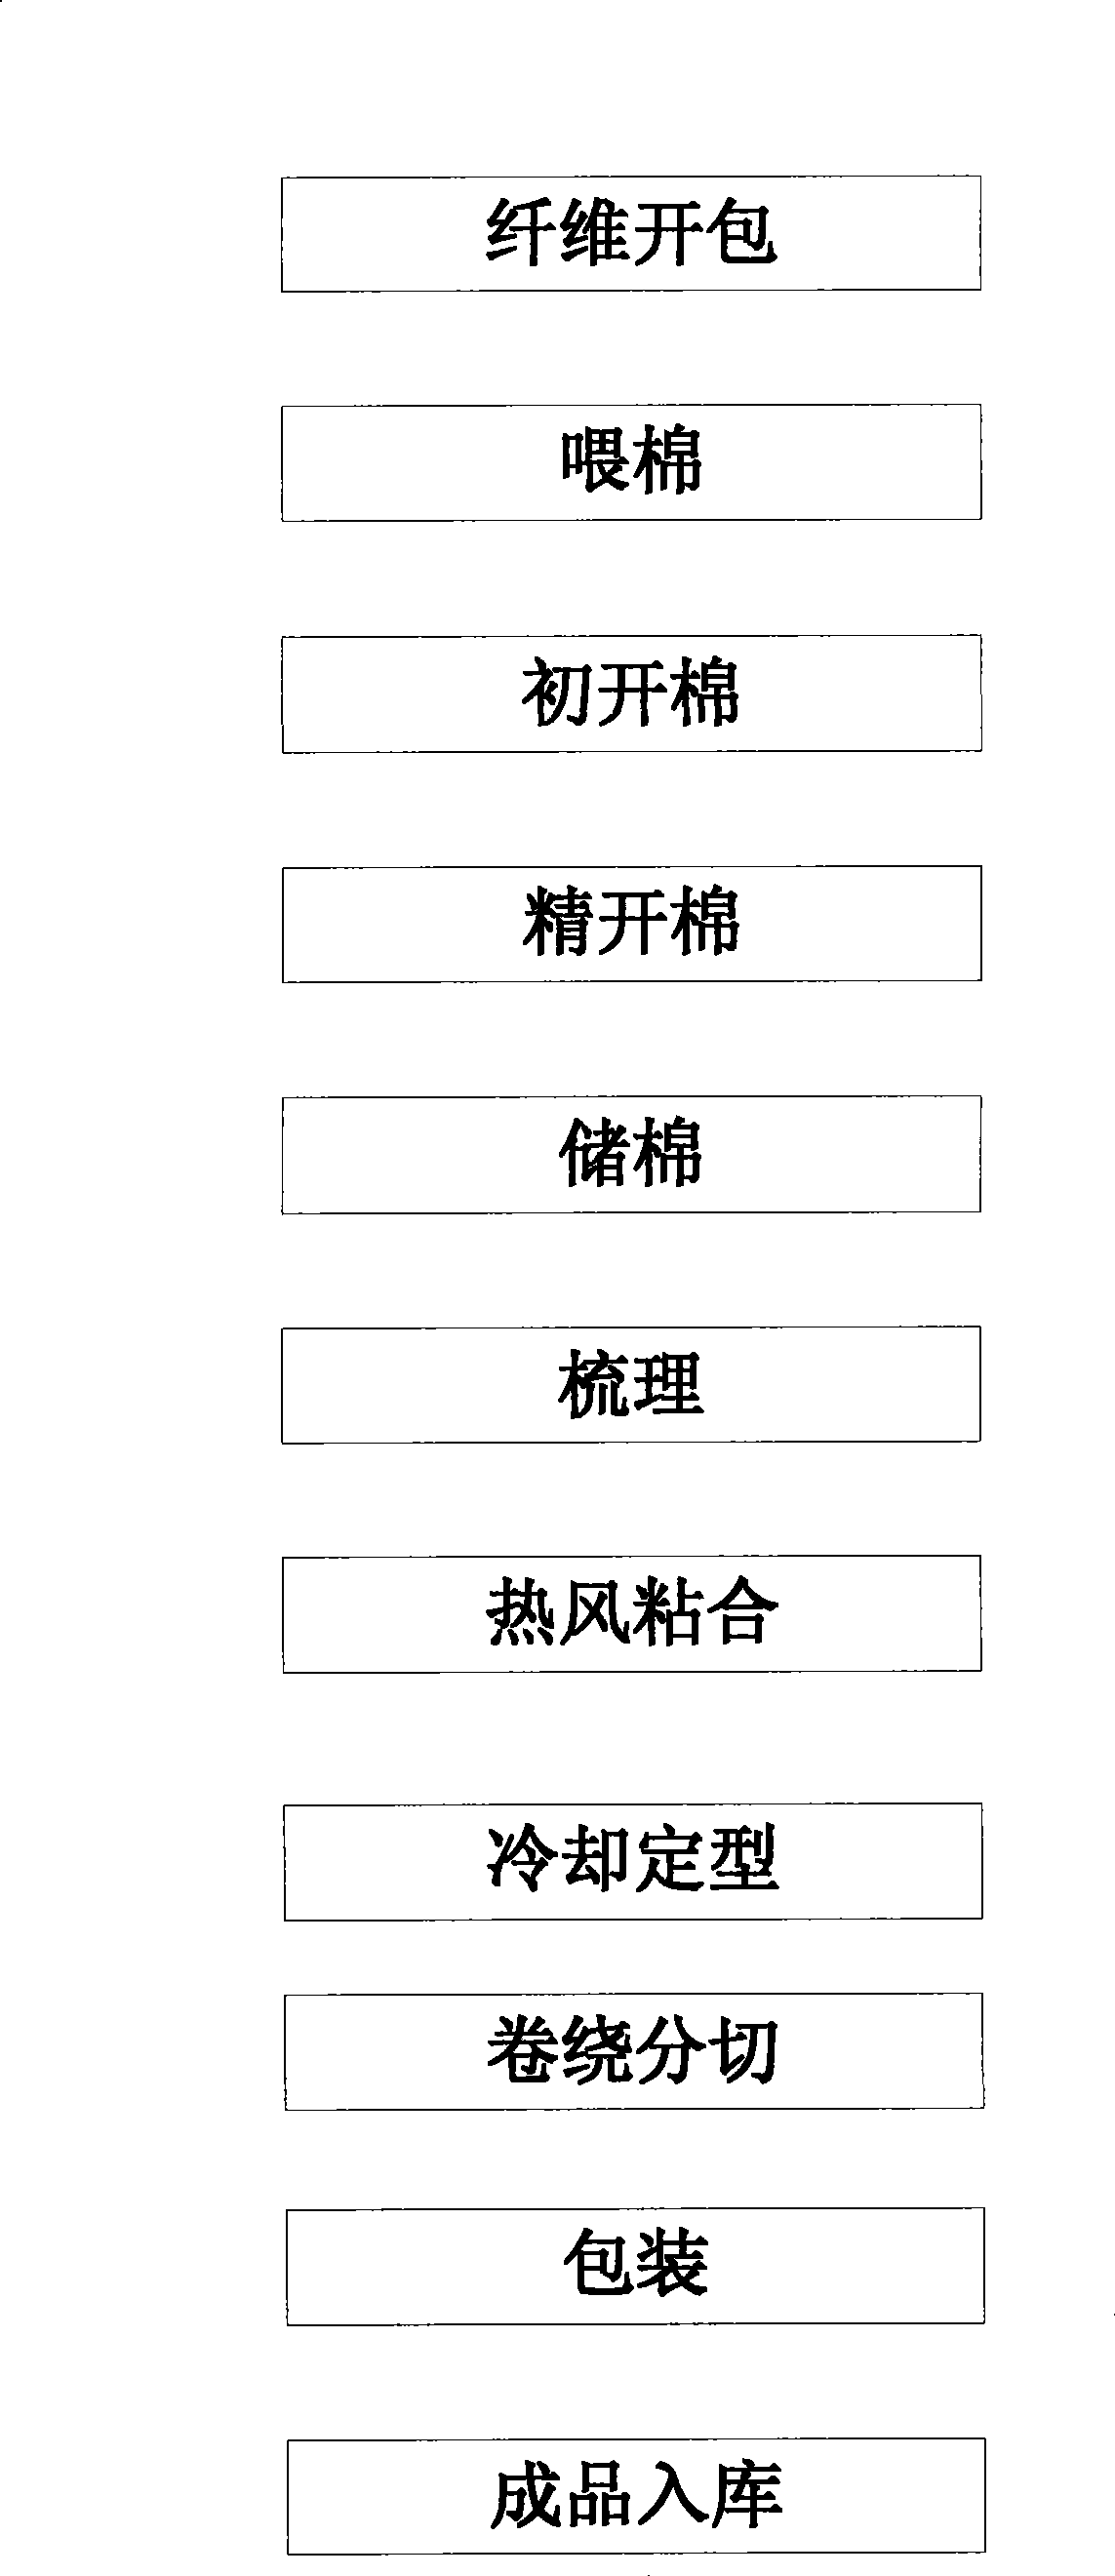 Nonwoven fabric containing polyester complex fiber, preparation thereof and use as hydroscopic substance flow guiding layer